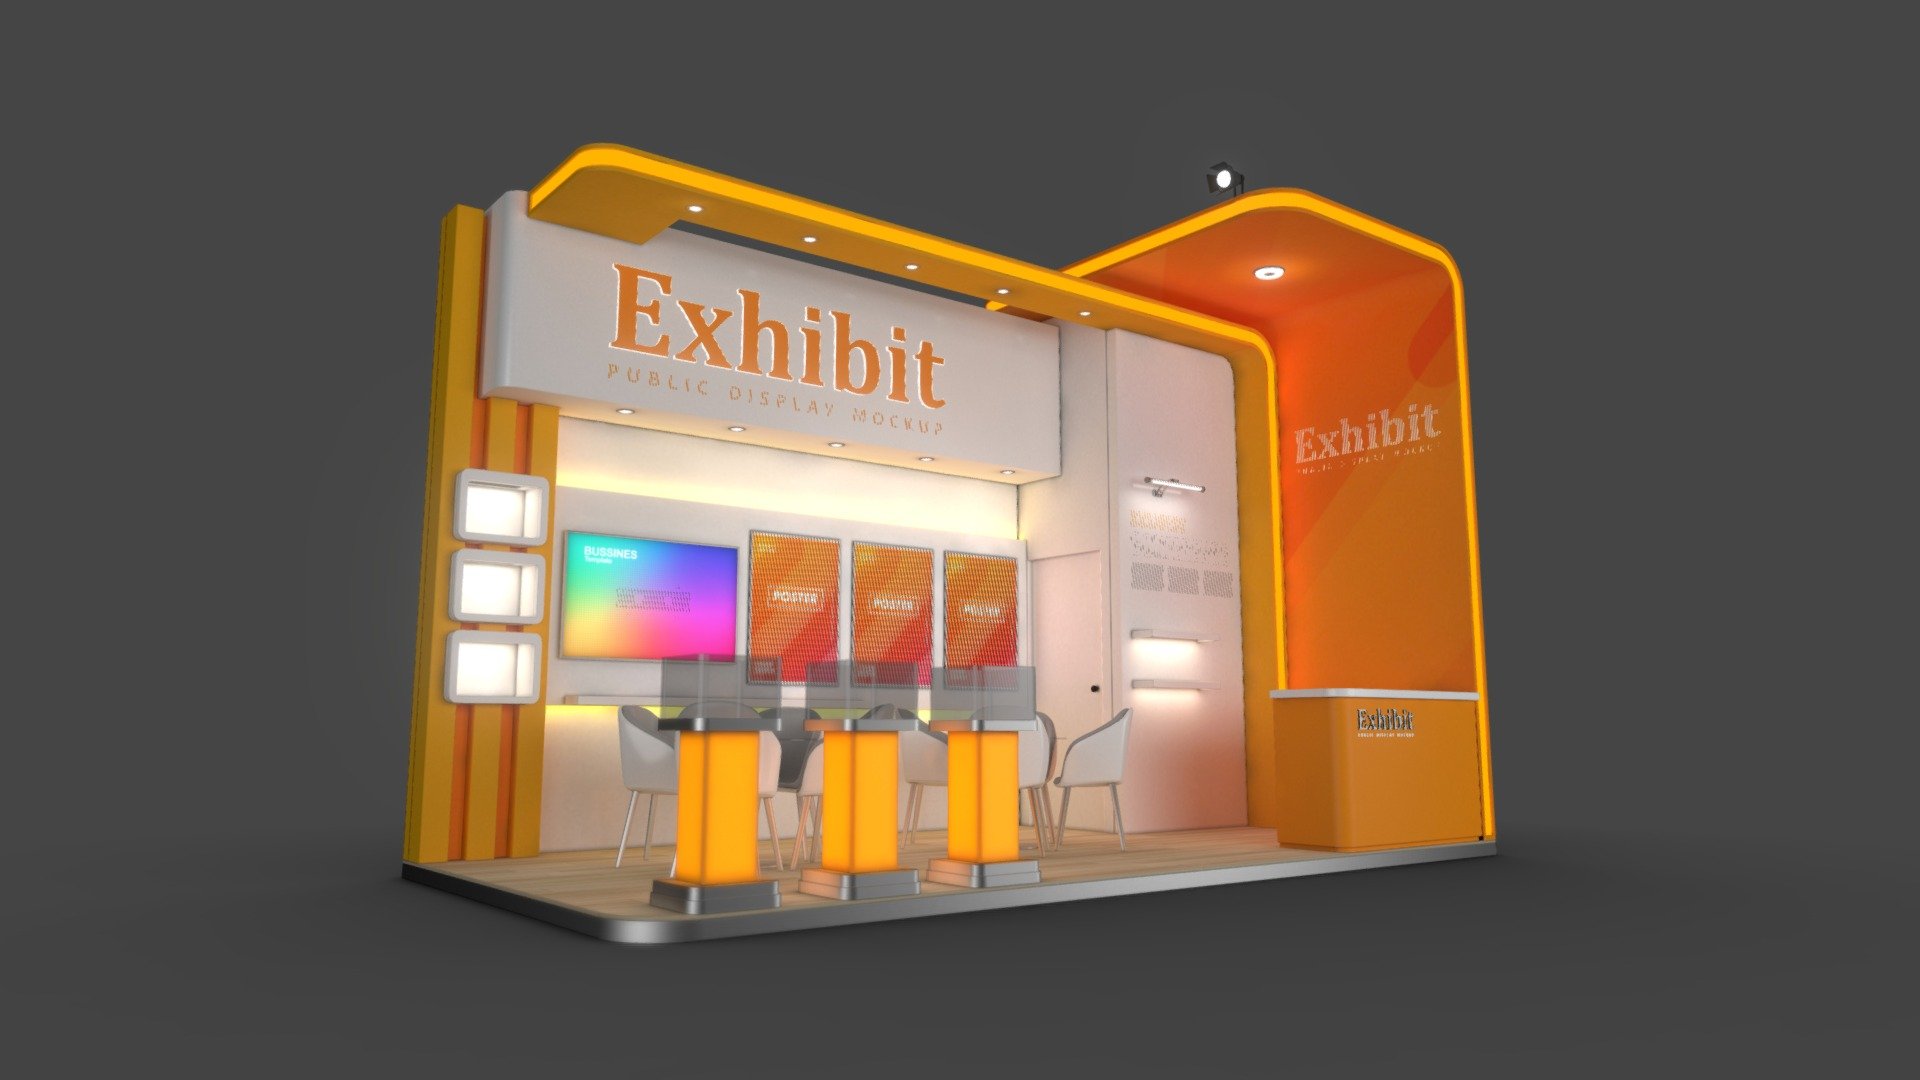 Booth Design 3D Model

Layout: 6x3m - 18 Sqm - 2 Exposed sides - max height:4,1m

Unit: cm

additional File:





Model_2304_3Ds max 2020 / Vray 5




Model_2304_3Ds max 2017 / Default Render




Model_2304_Fbx Standard map




Model_2304_Fbx V ray complete map




Model_2304_Obj Standard map




Model_2304_Obj V ray complete map



thank you for visiting

If you are interested in other models, please visit my collection



EXHIBITION STAND 36 Sqm
https://sketchfab.com/fasih.lisan/collections/exhibition-stand-36-sqm-34b6419aa7ec4556b18d8a381c51db77

EXHIBITION STAND 18 Sqm
https://sketchfab.com/fasih.lisan/collections/exhibition-stand-18-sqm-9a22add1012e4c36961b6e1db26a0280

EXHIBITION STAND 9 sqm
https://sketchfab.com/fasih.lisan/collections/exhibition-stand-9-sqm-2afc738a25634768ba5335da876876f2 - Model 2304 Exhibition Design 18 Sqm - Buy Royalty Free 3D model by fasih.lisan 3d model